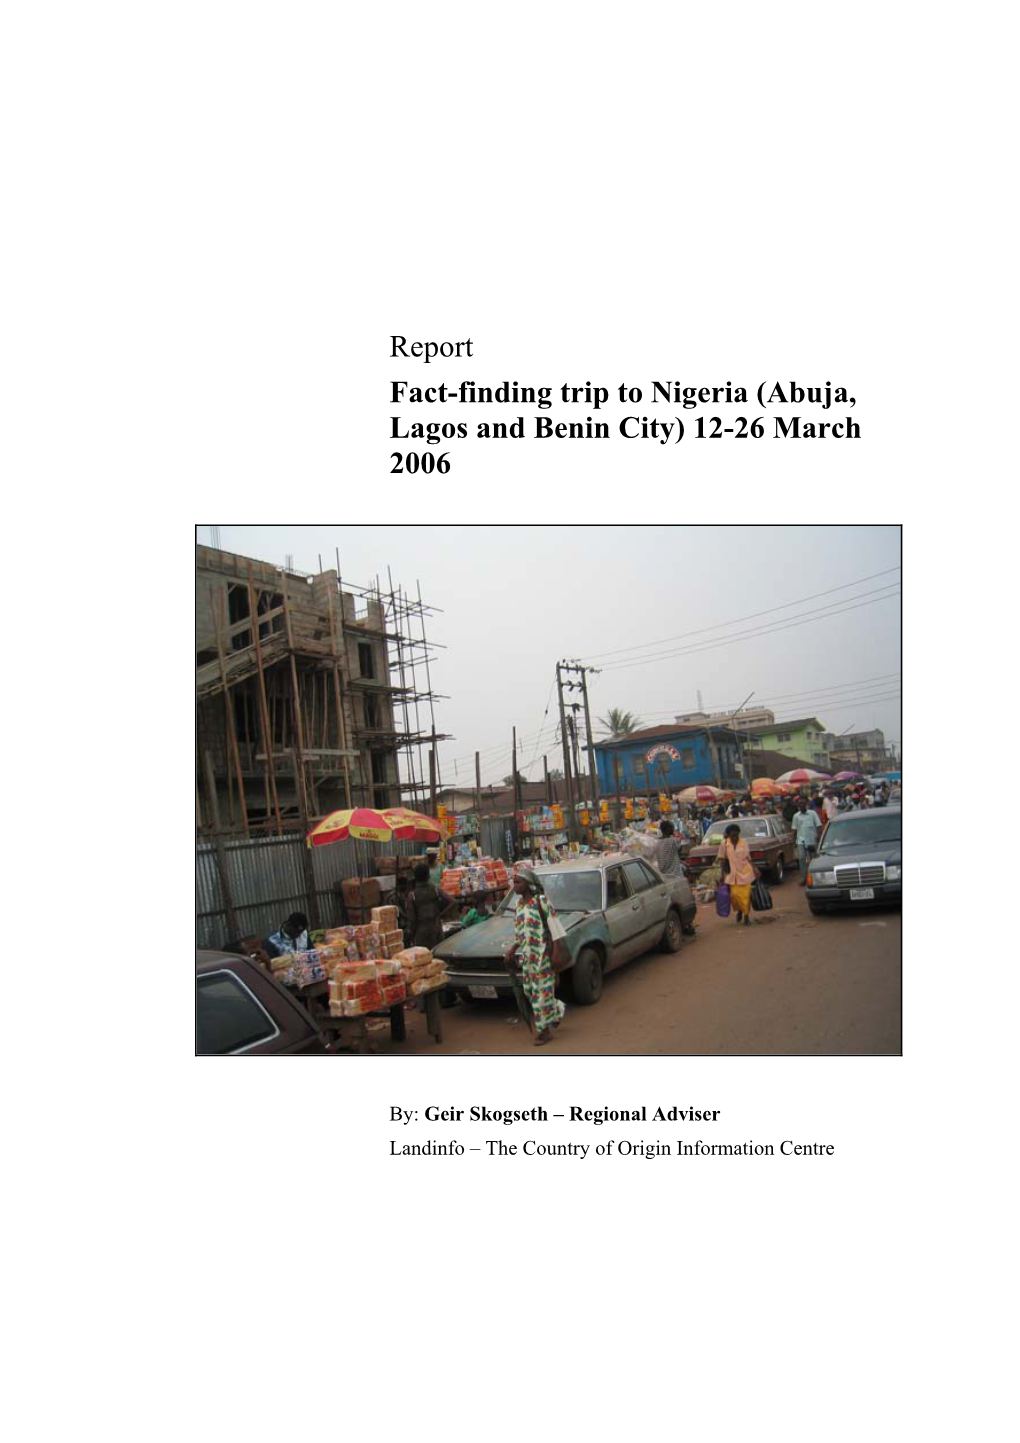 Report Fact-Finding Trip to Nigeria (Abuja, Lagos and Benin City) 12-26 March 2006